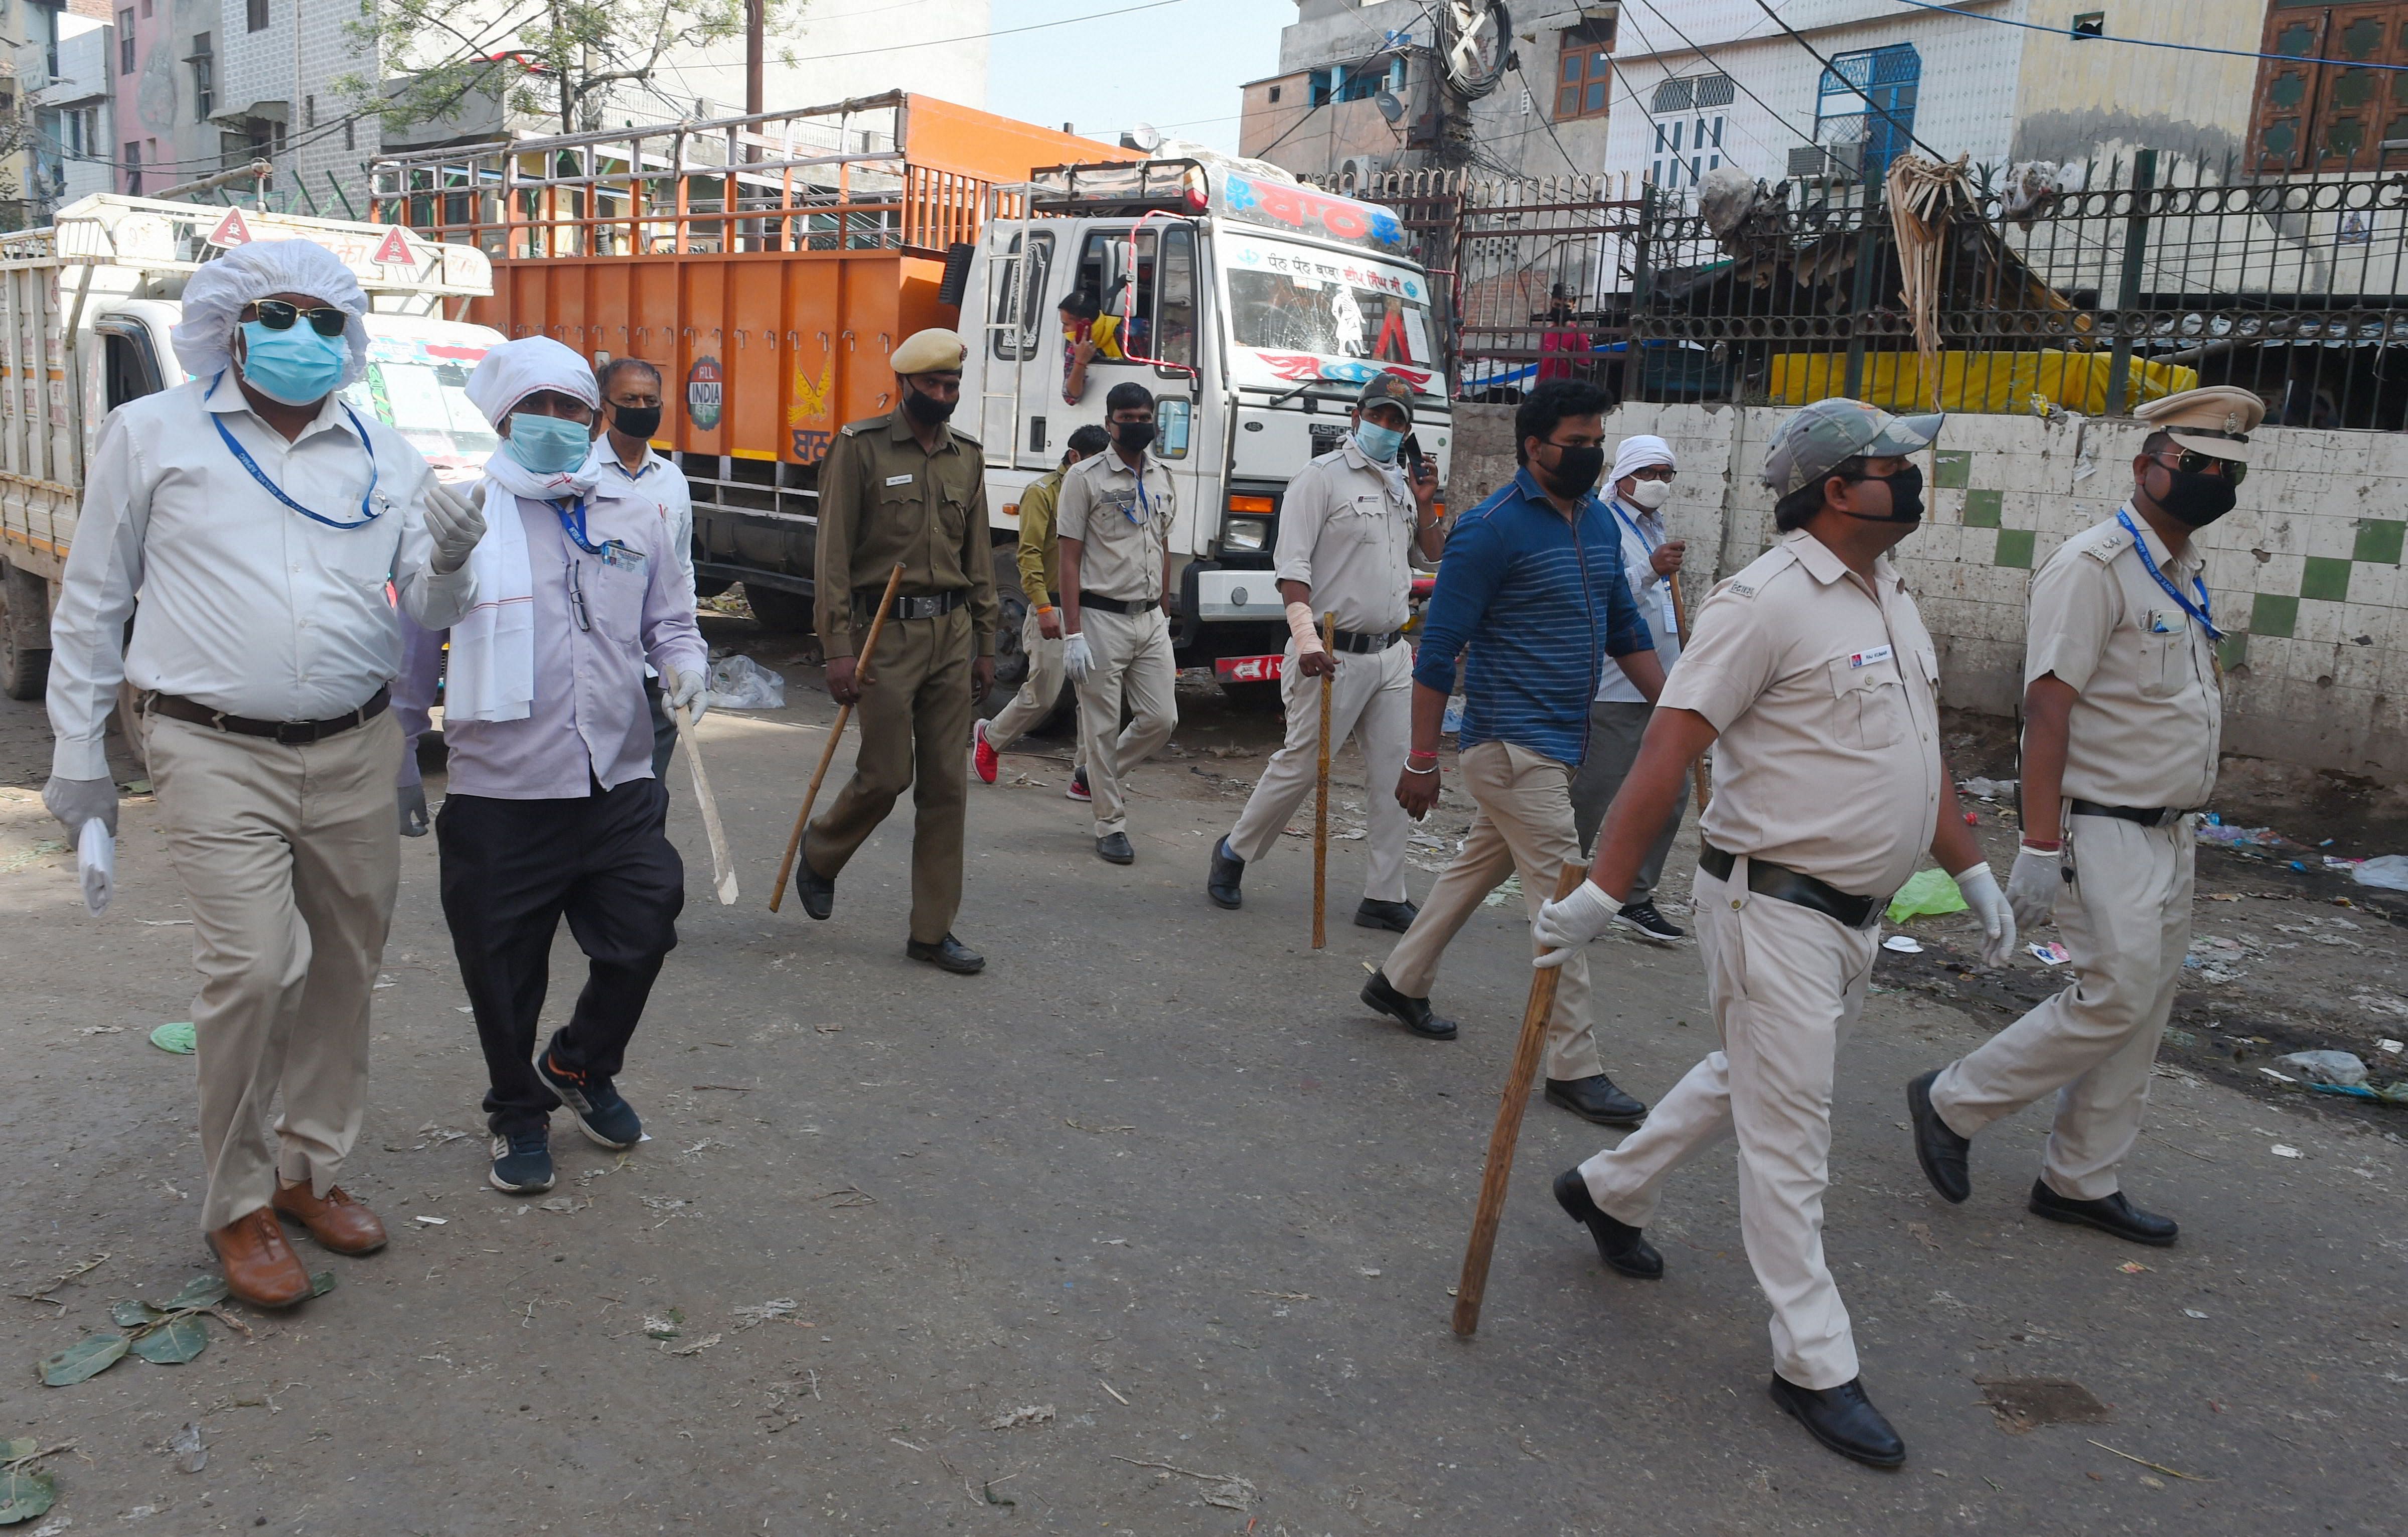 Government officials and Delhi Police personnel patrol Azadpur Mandi during the nationwide lockdown to curb the spread of coronavirus. (PTI Photo)